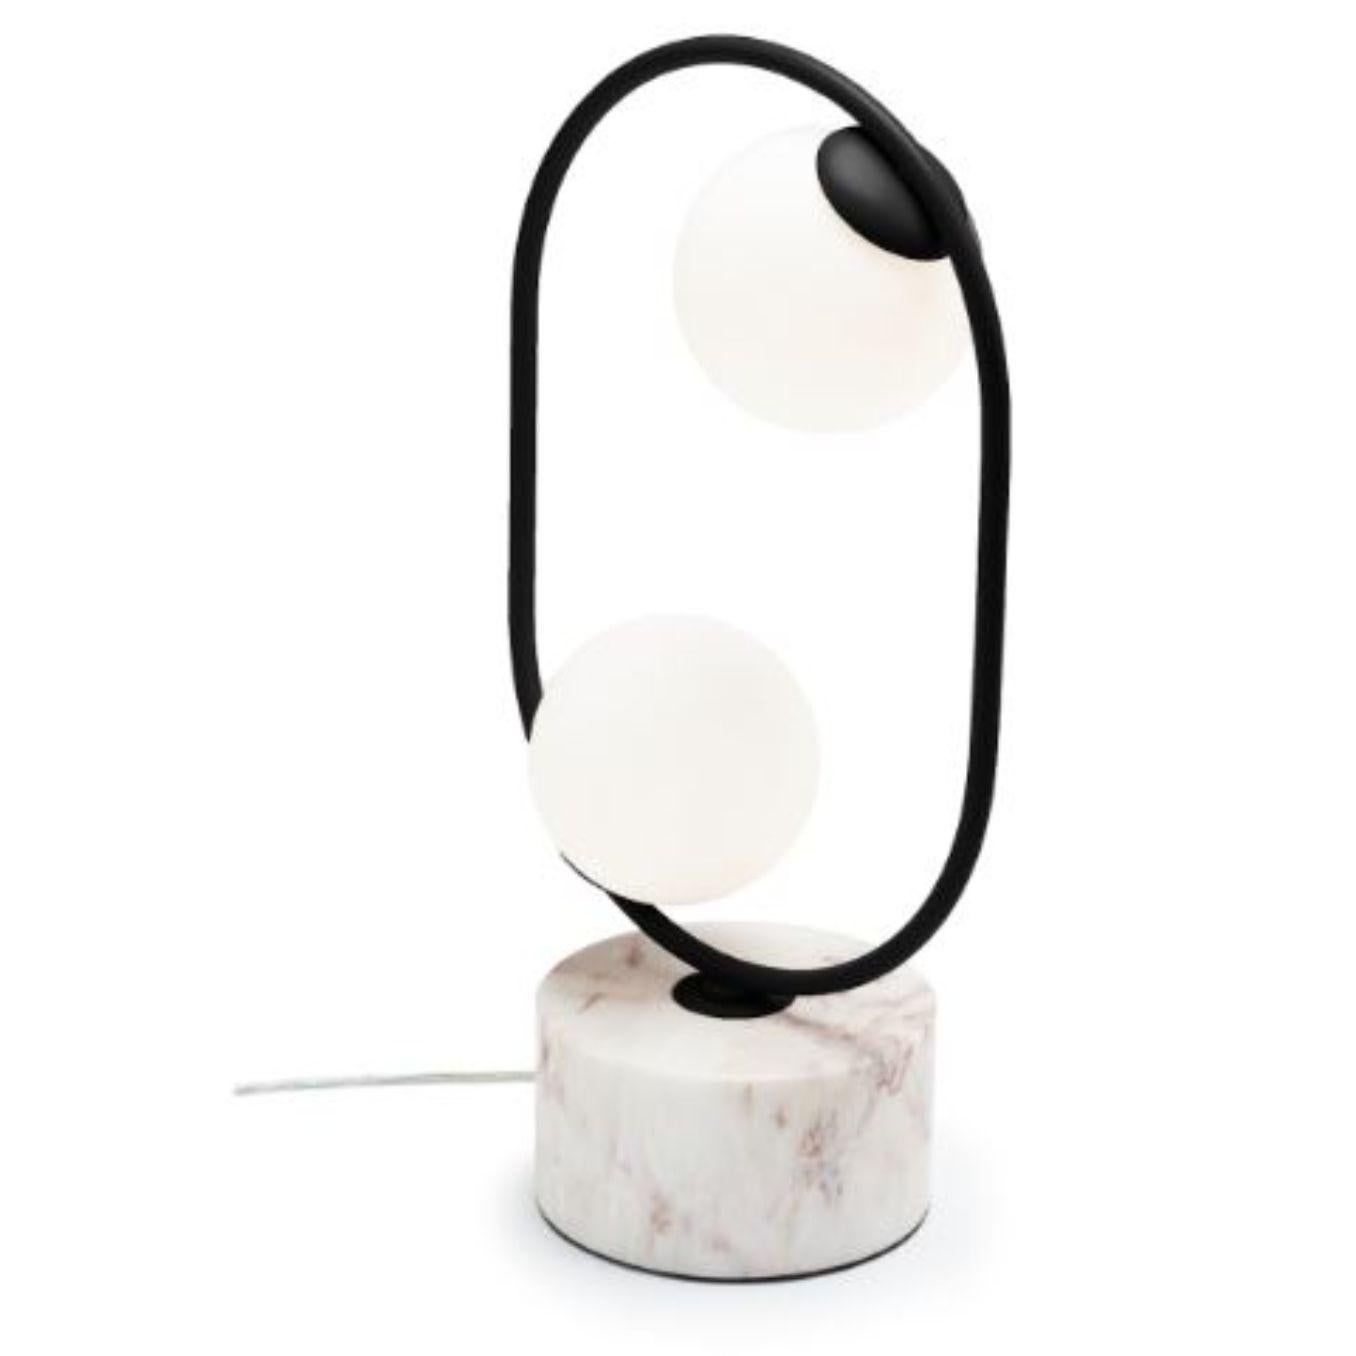 Loop table I lamp with marble base by Dooq
Dimensions: W 30 x D 15 x H 50 cm
Materials: lacquered metal, polished or brushed metal, marble.
Also available in different colors and materials. 

Information:
230V/50Hz
2 x max. G9
4W